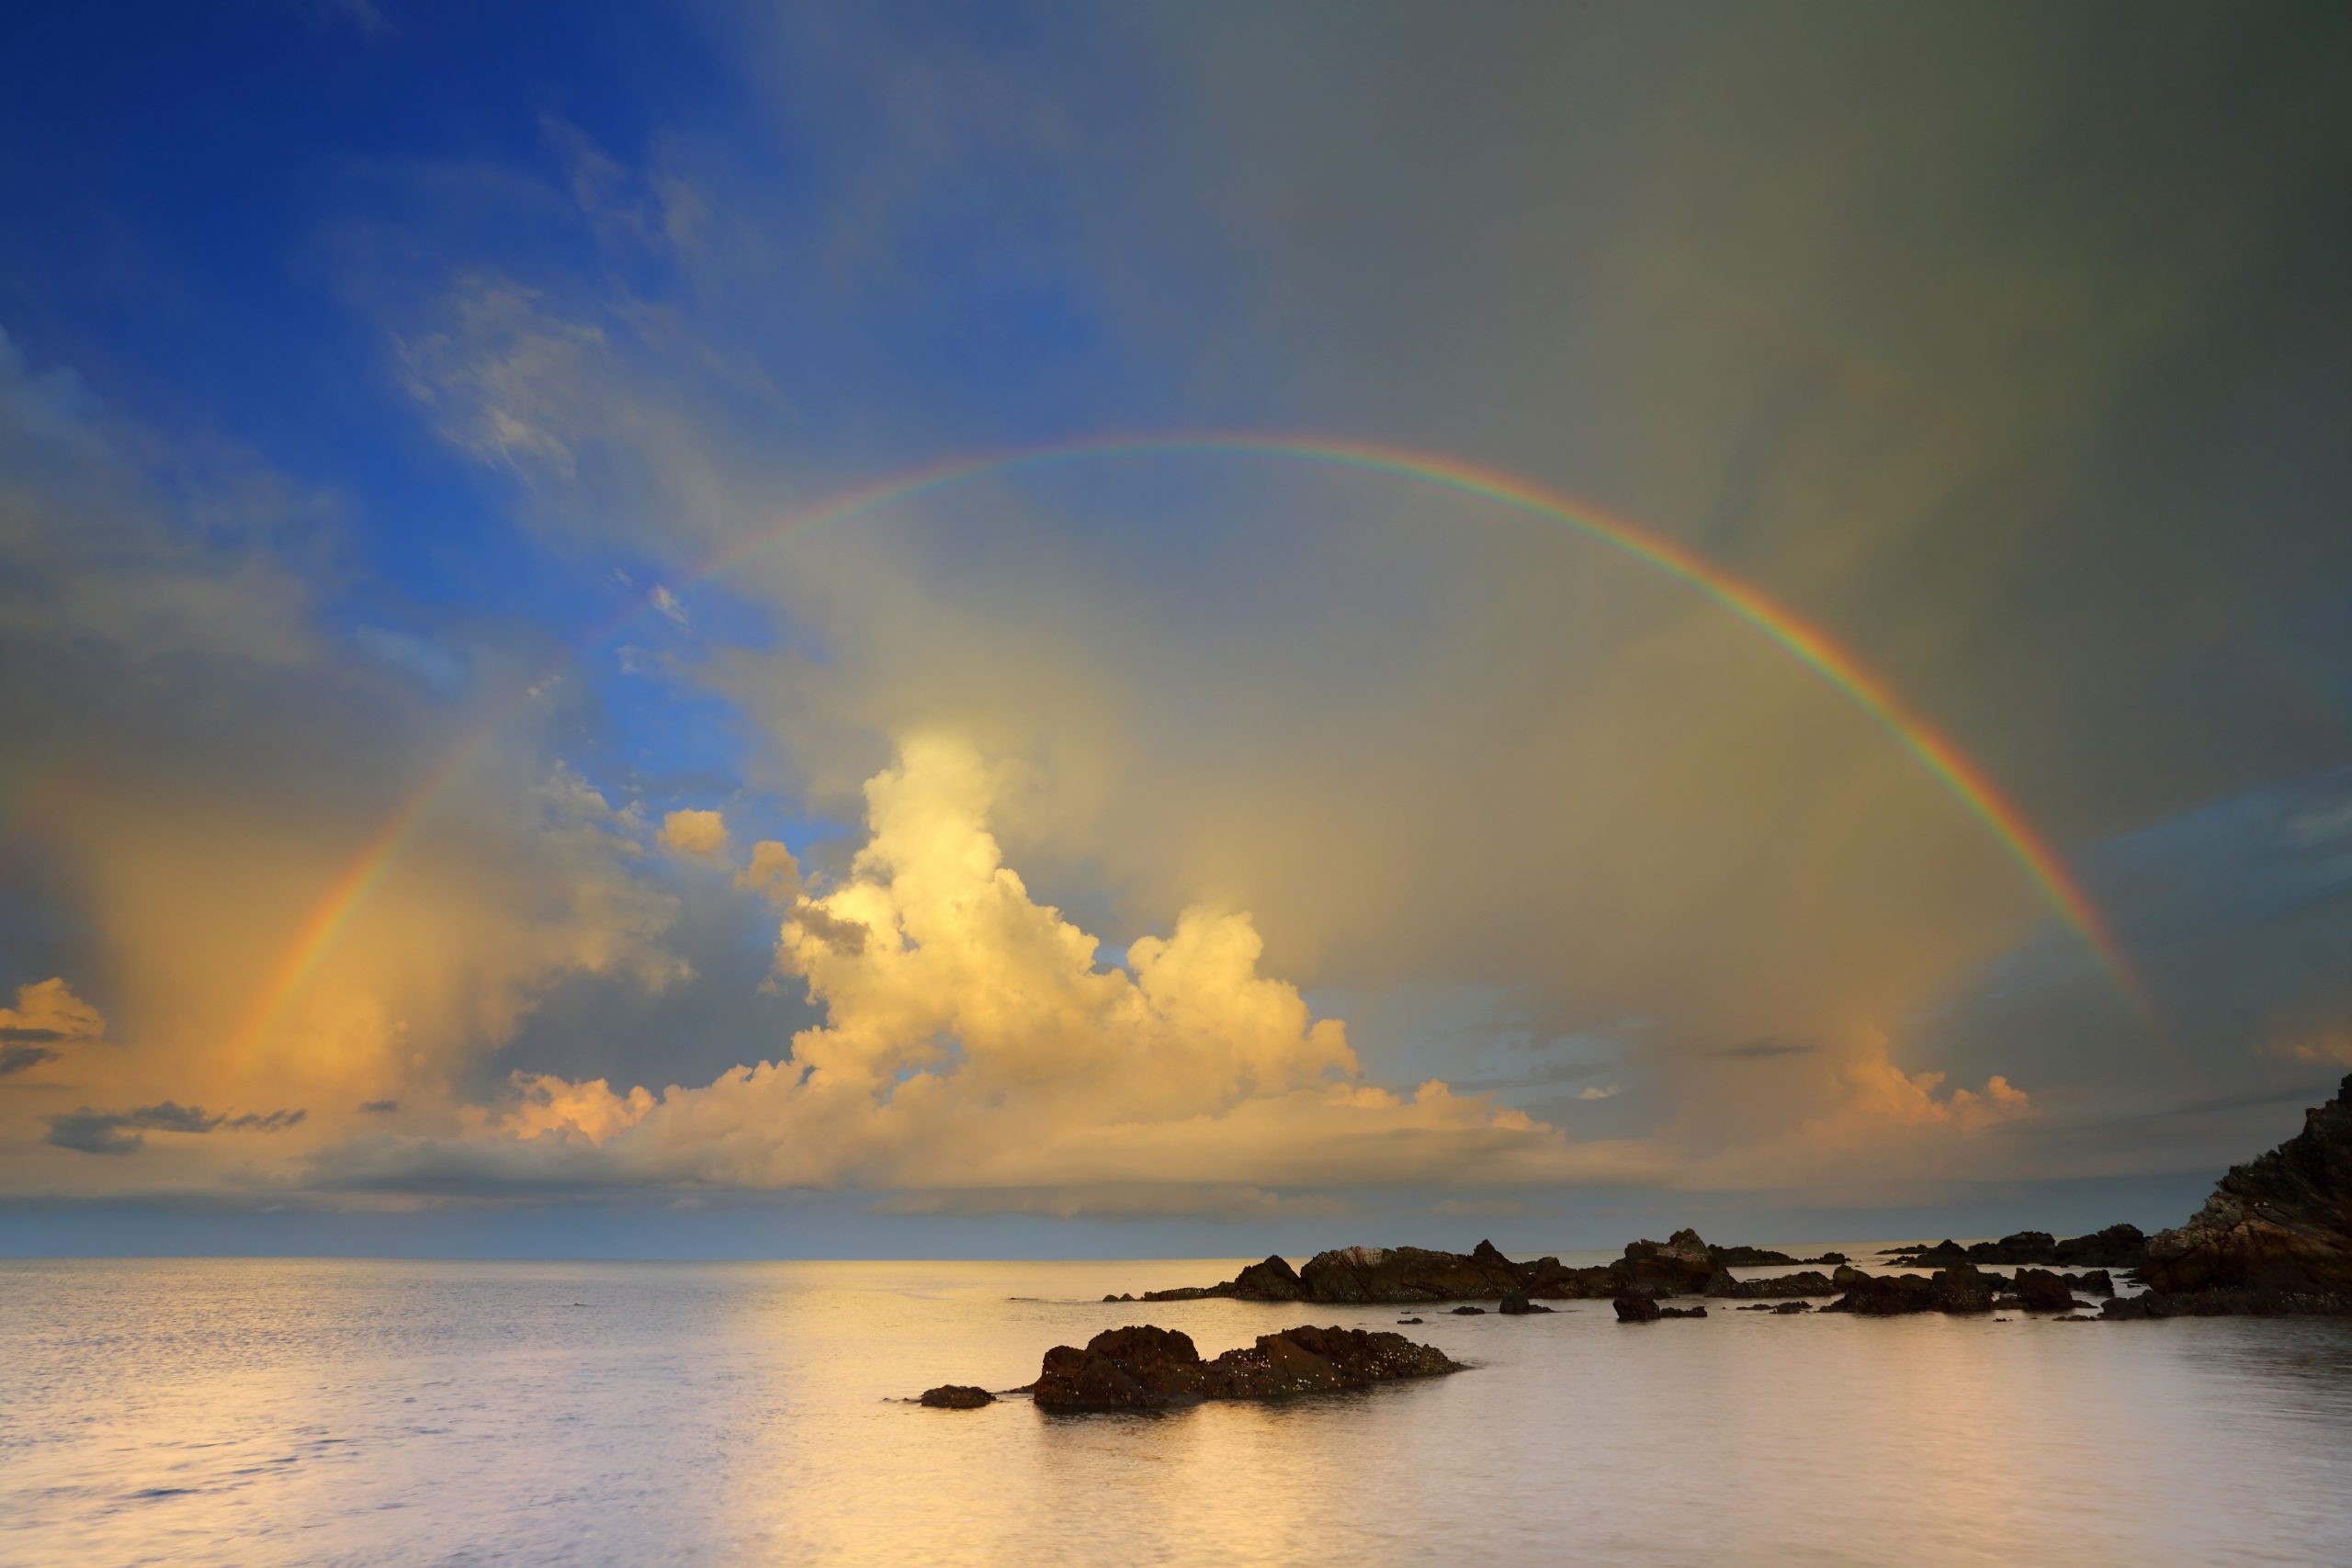 Rainbow with clouds over a water body